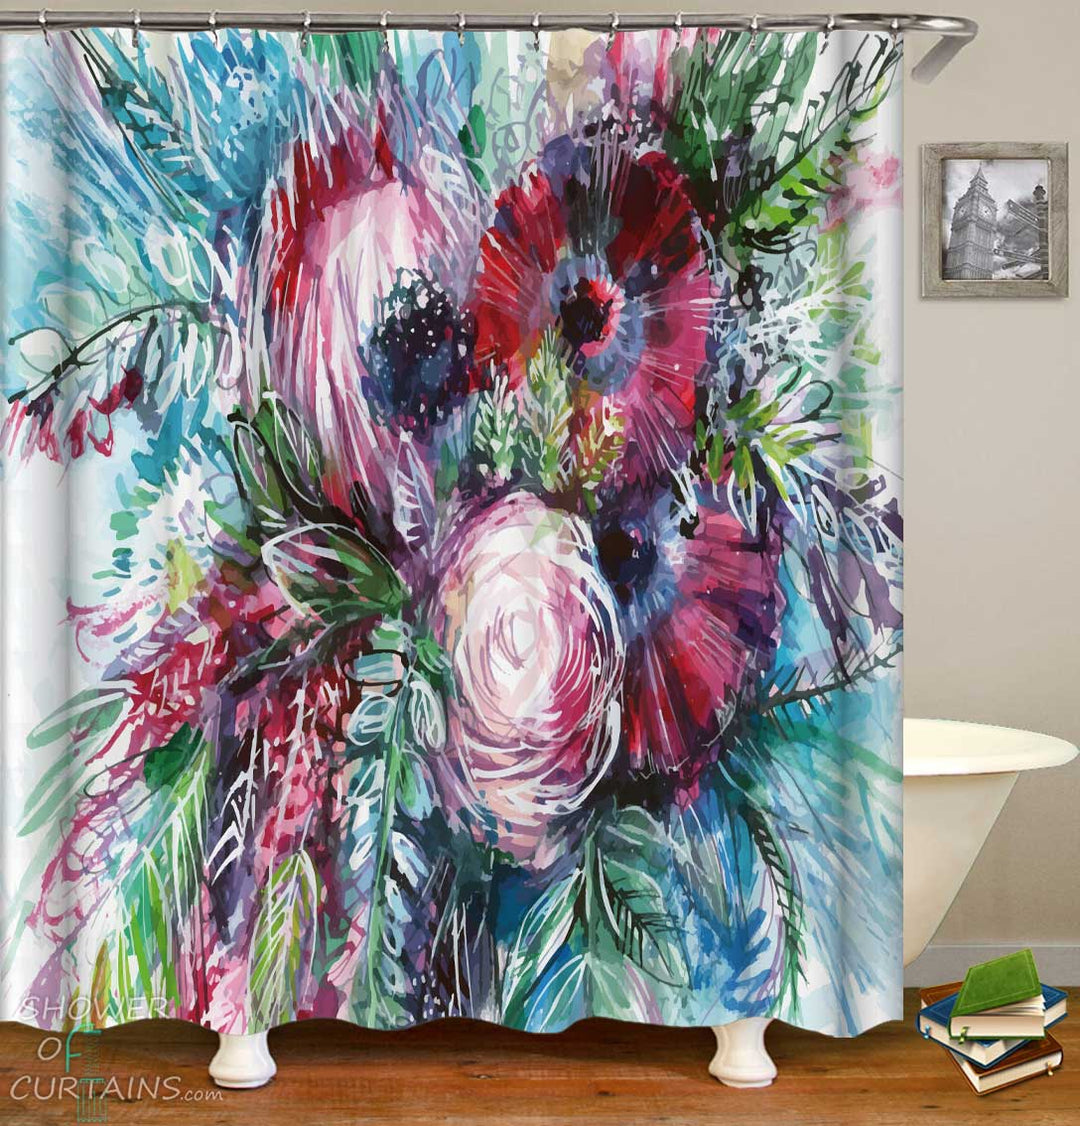 Shower Curtains with Floral Mess Art